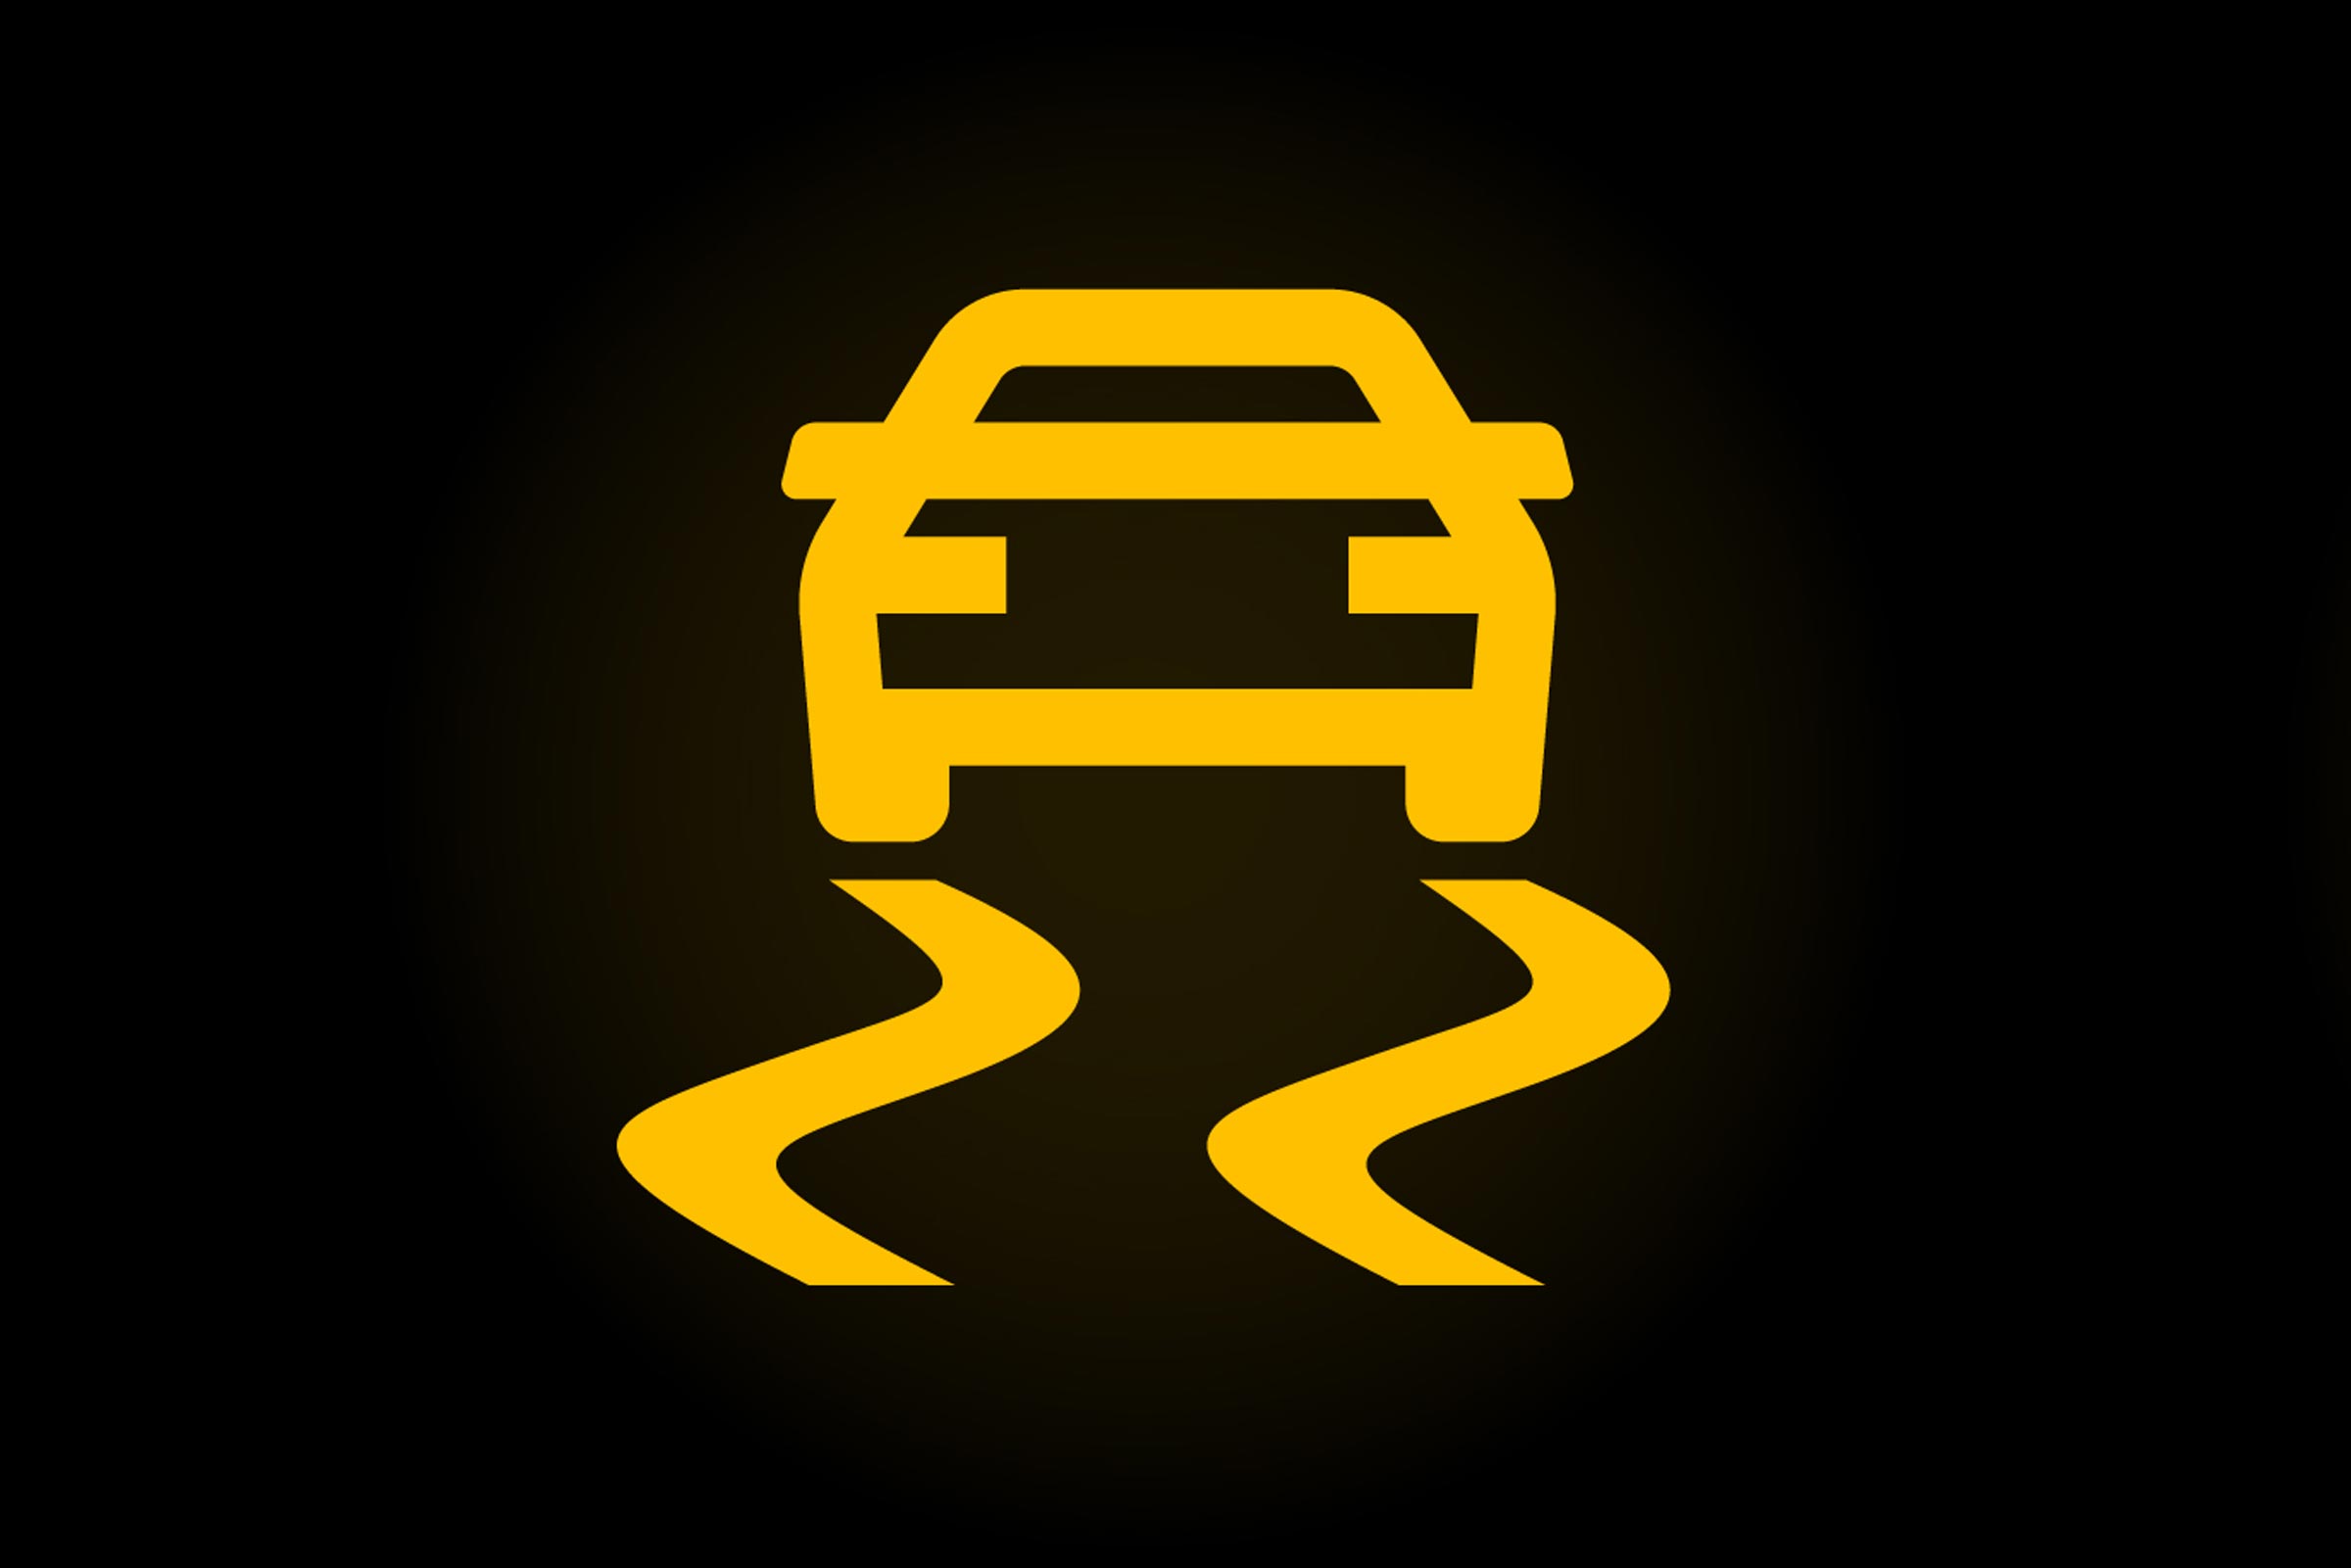 Traction Control Light